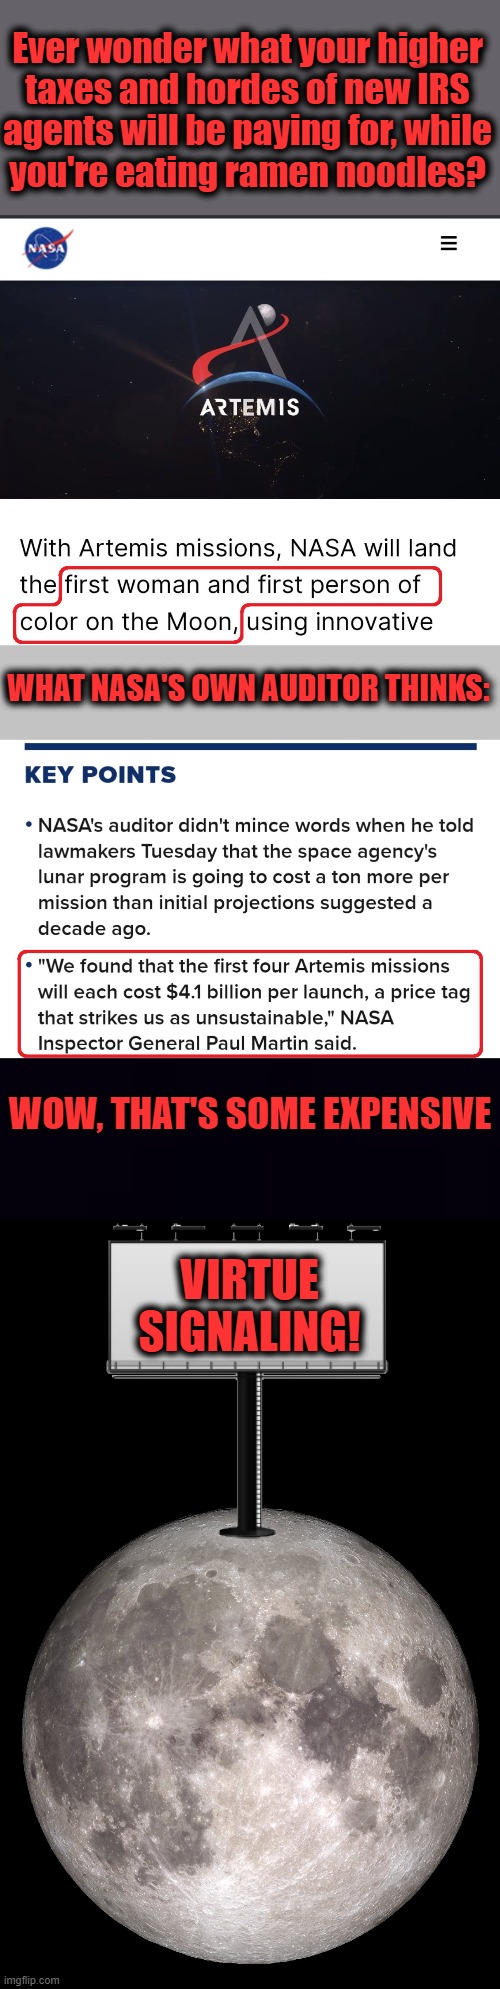 Expensive virtue signaling | Ever wonder what your higher
taxes and hordes of new IRS
agents will be paying for, while
you're eating ramen noodles? WHAT NASA'S OWN AUDITOR THINKS:; WOW, THAT'S SOME EXPENSIVE; VIRTUE SIGNALING! | image tagged in gray,plain black,nasa,artemis,mission,democrats | made w/ Imgflip meme maker